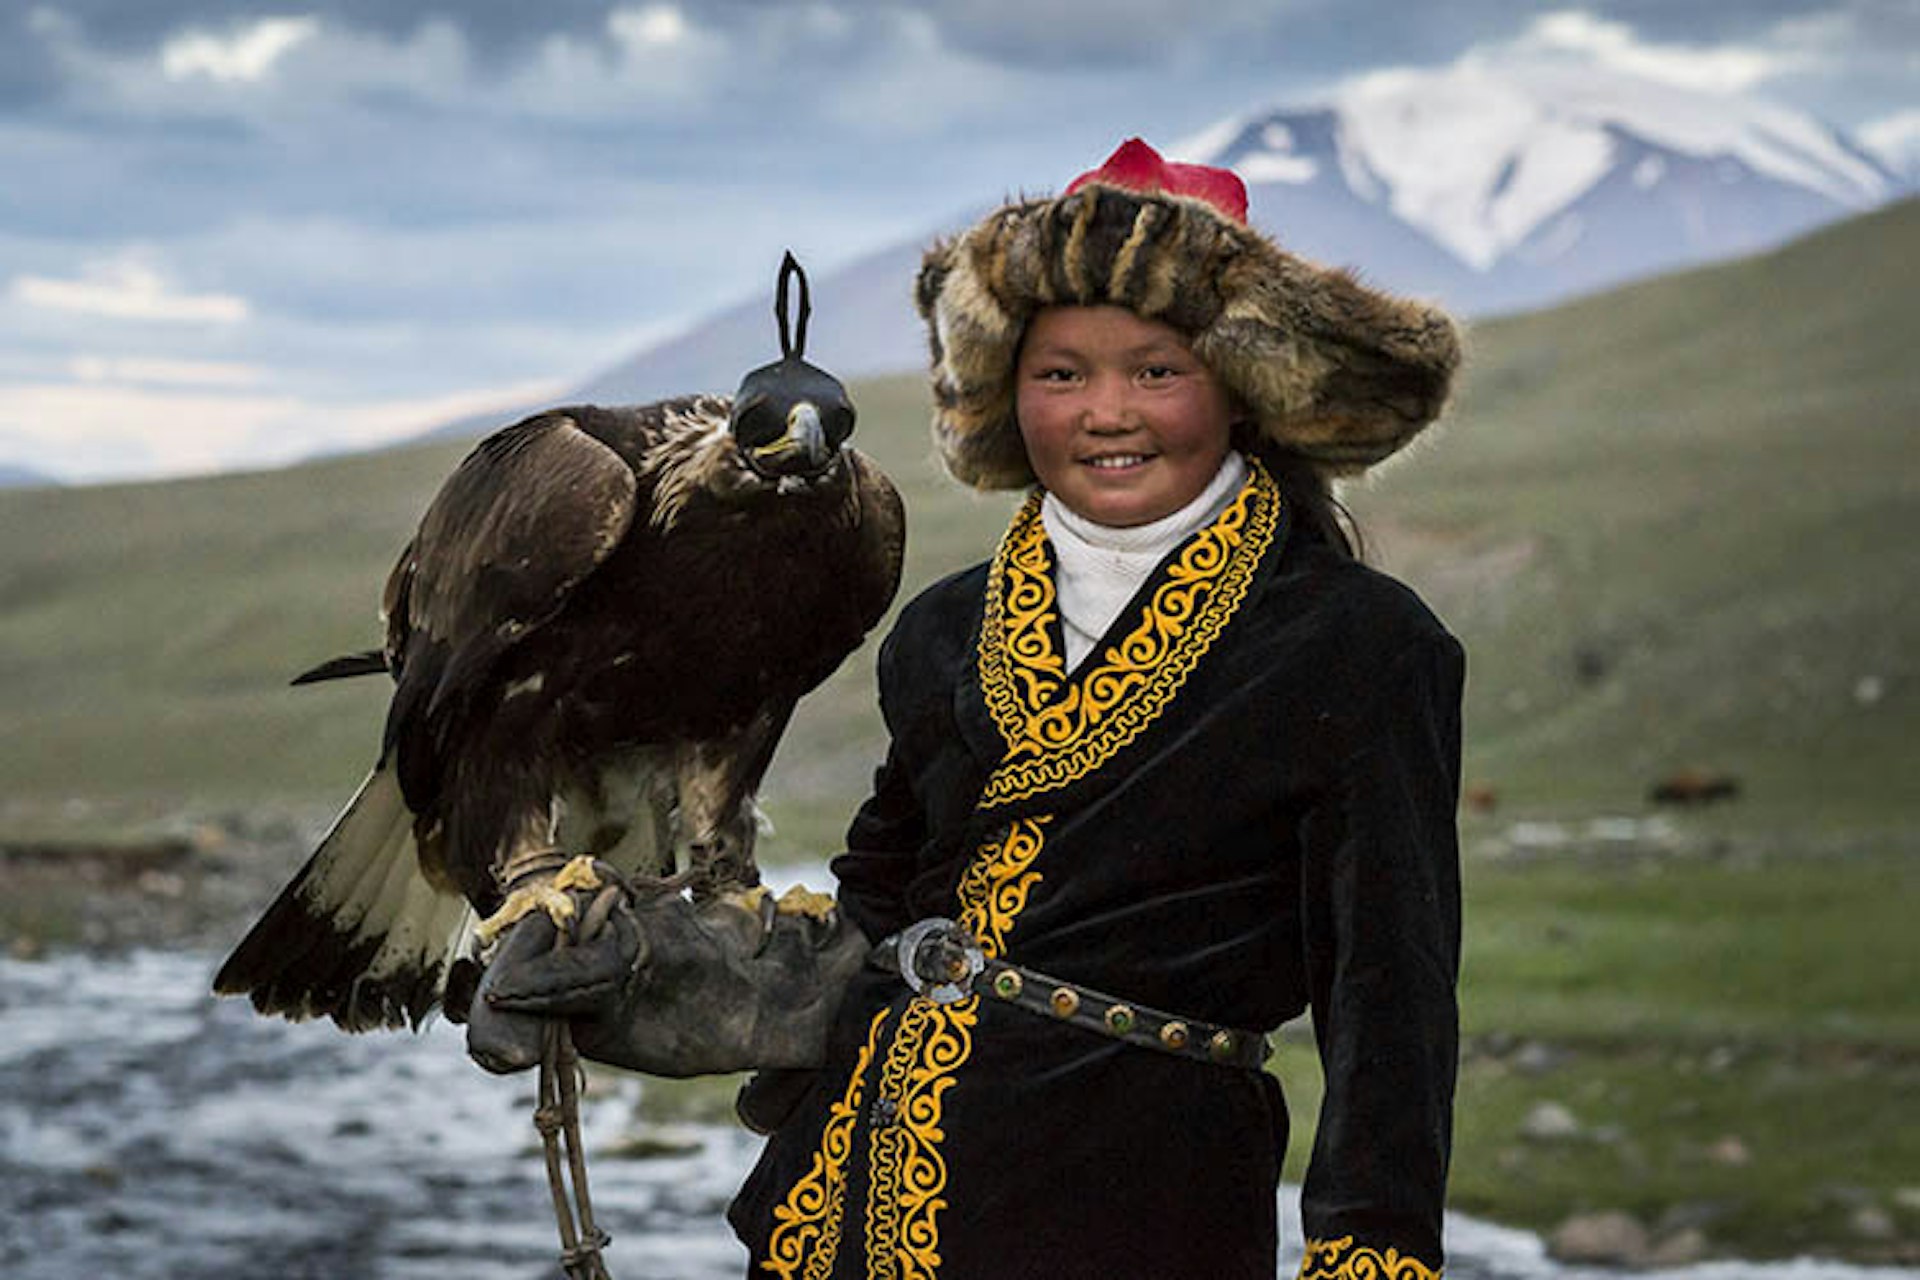 Female huntress Ashol-Pan with her father's eagle. Image by David Baxendale / Lonely Planet